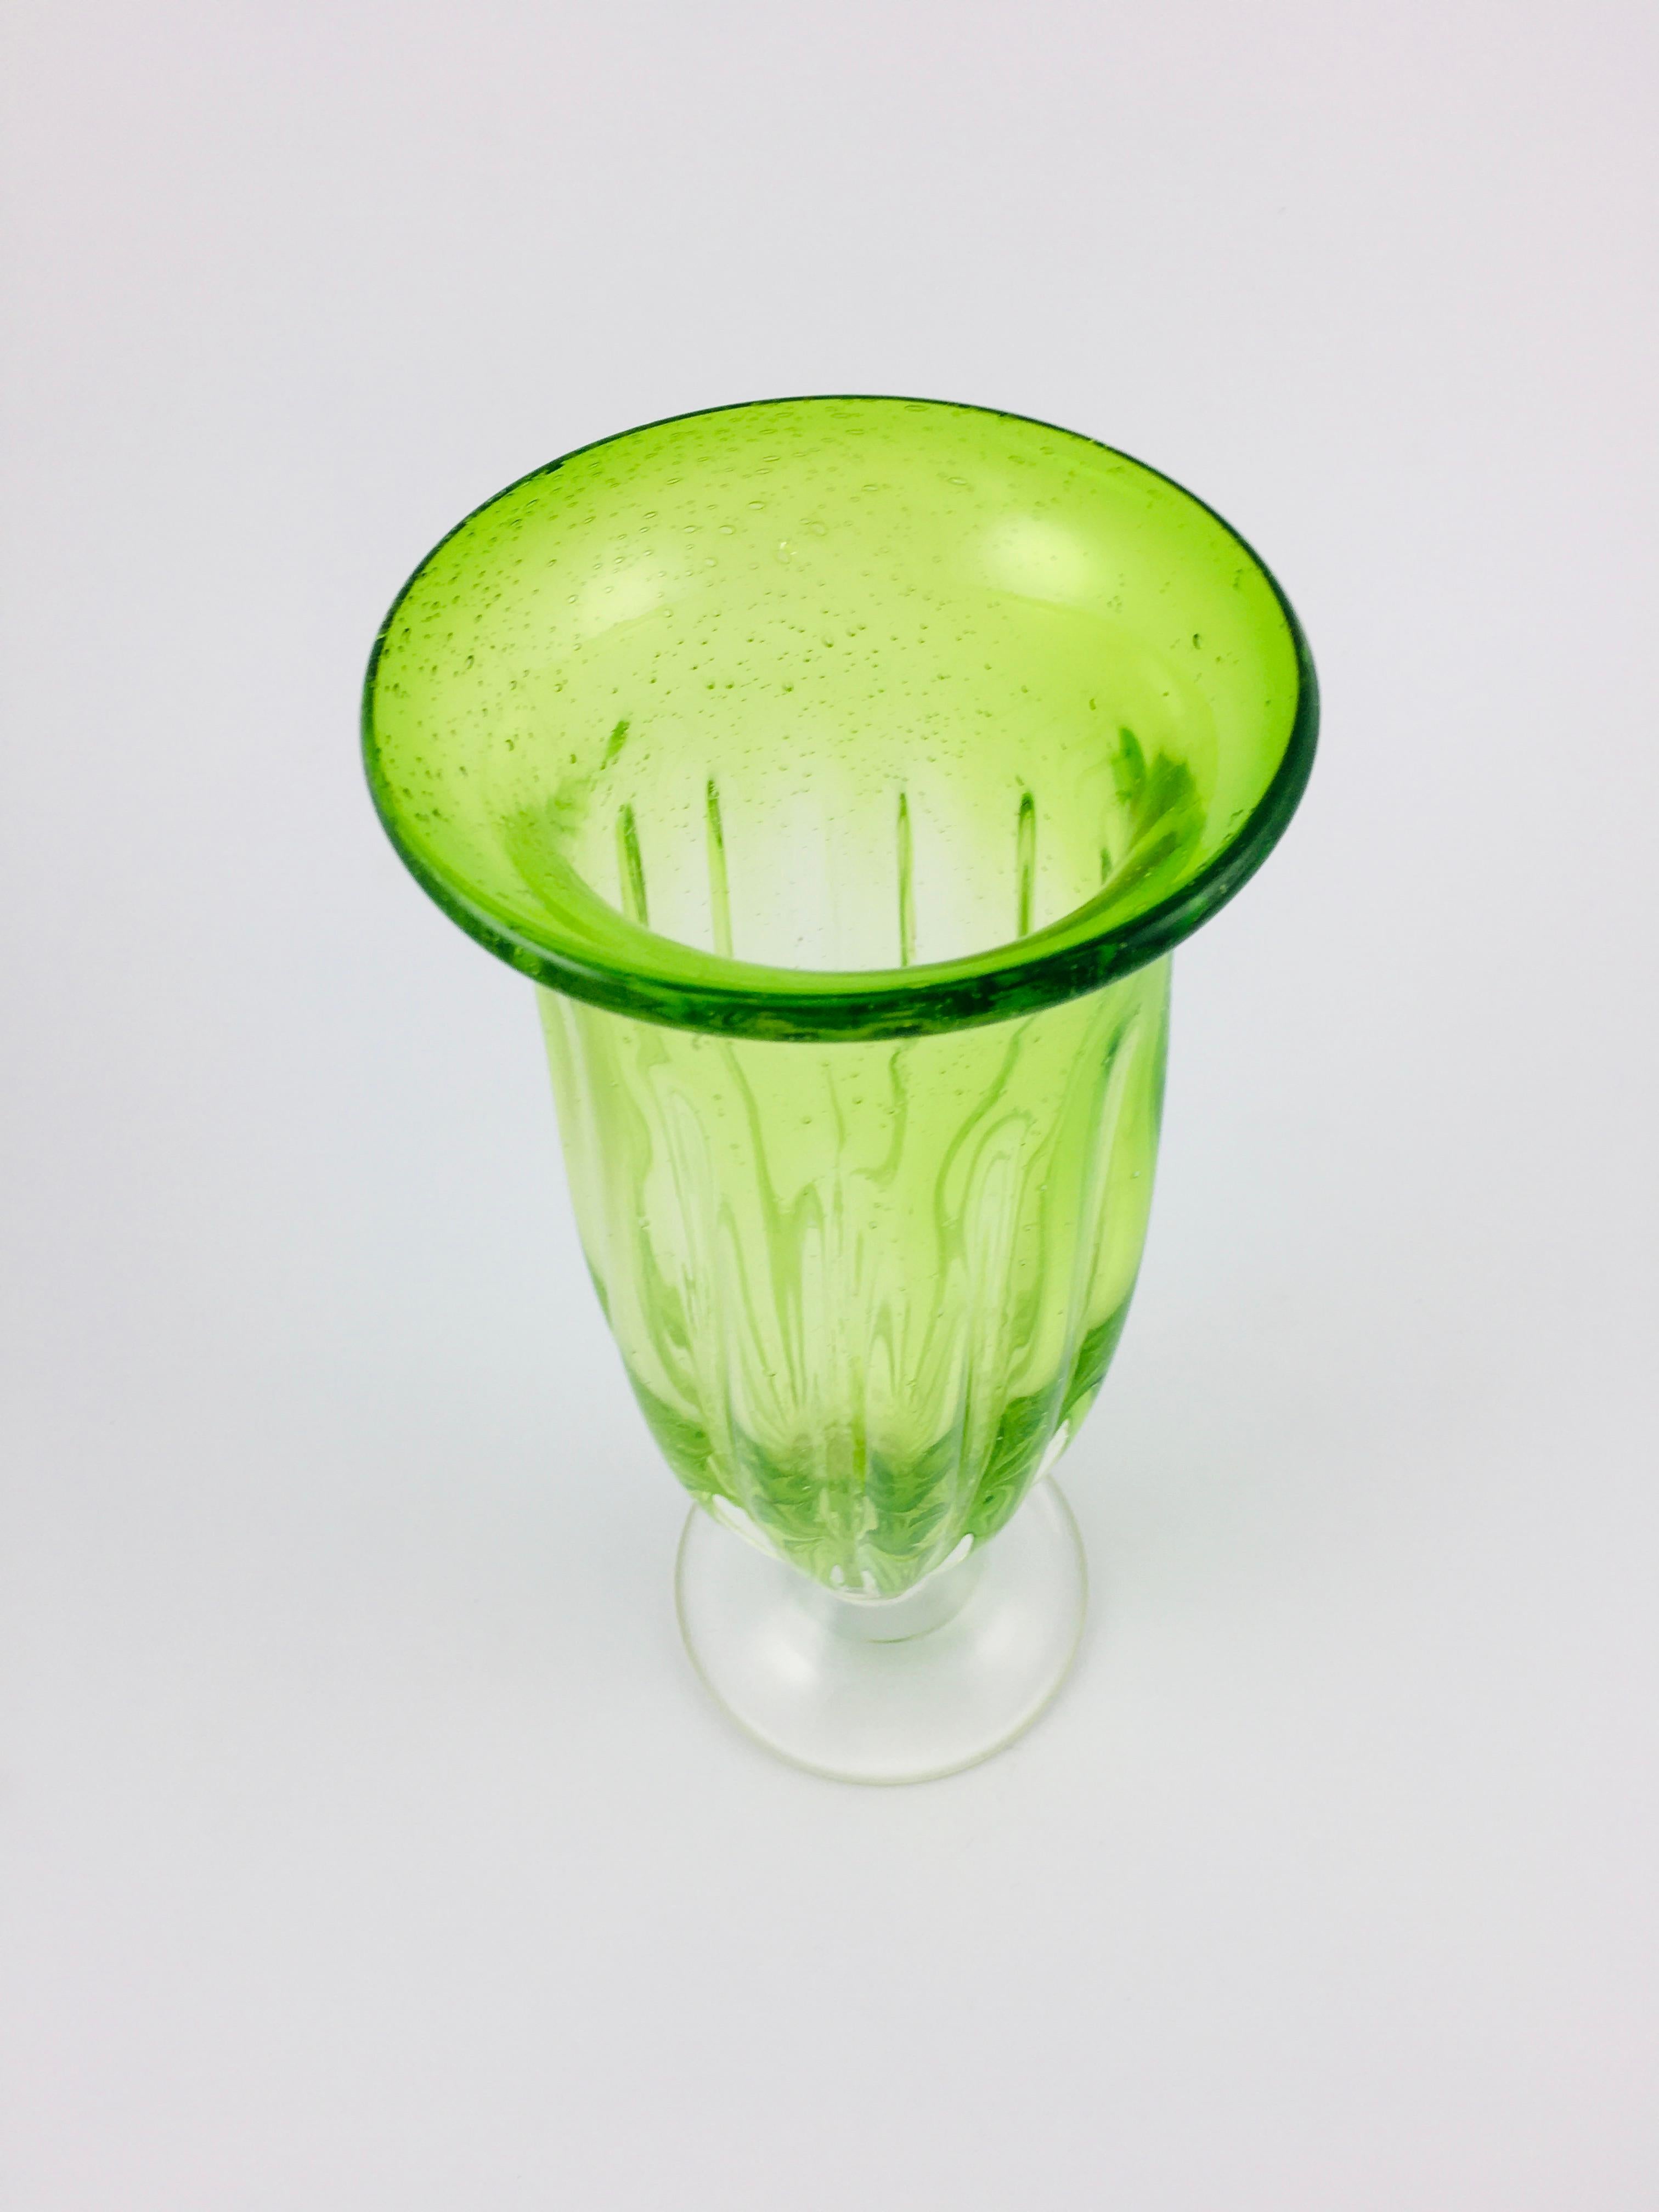 Handmade large Italian Murano glass vase in green color. Special vintage large vase with uranium green inner glass layer. Handmade glass, also excellent for decoration. In perfect condition, a rare piece. Glass vase with ribbed sides, handmade.